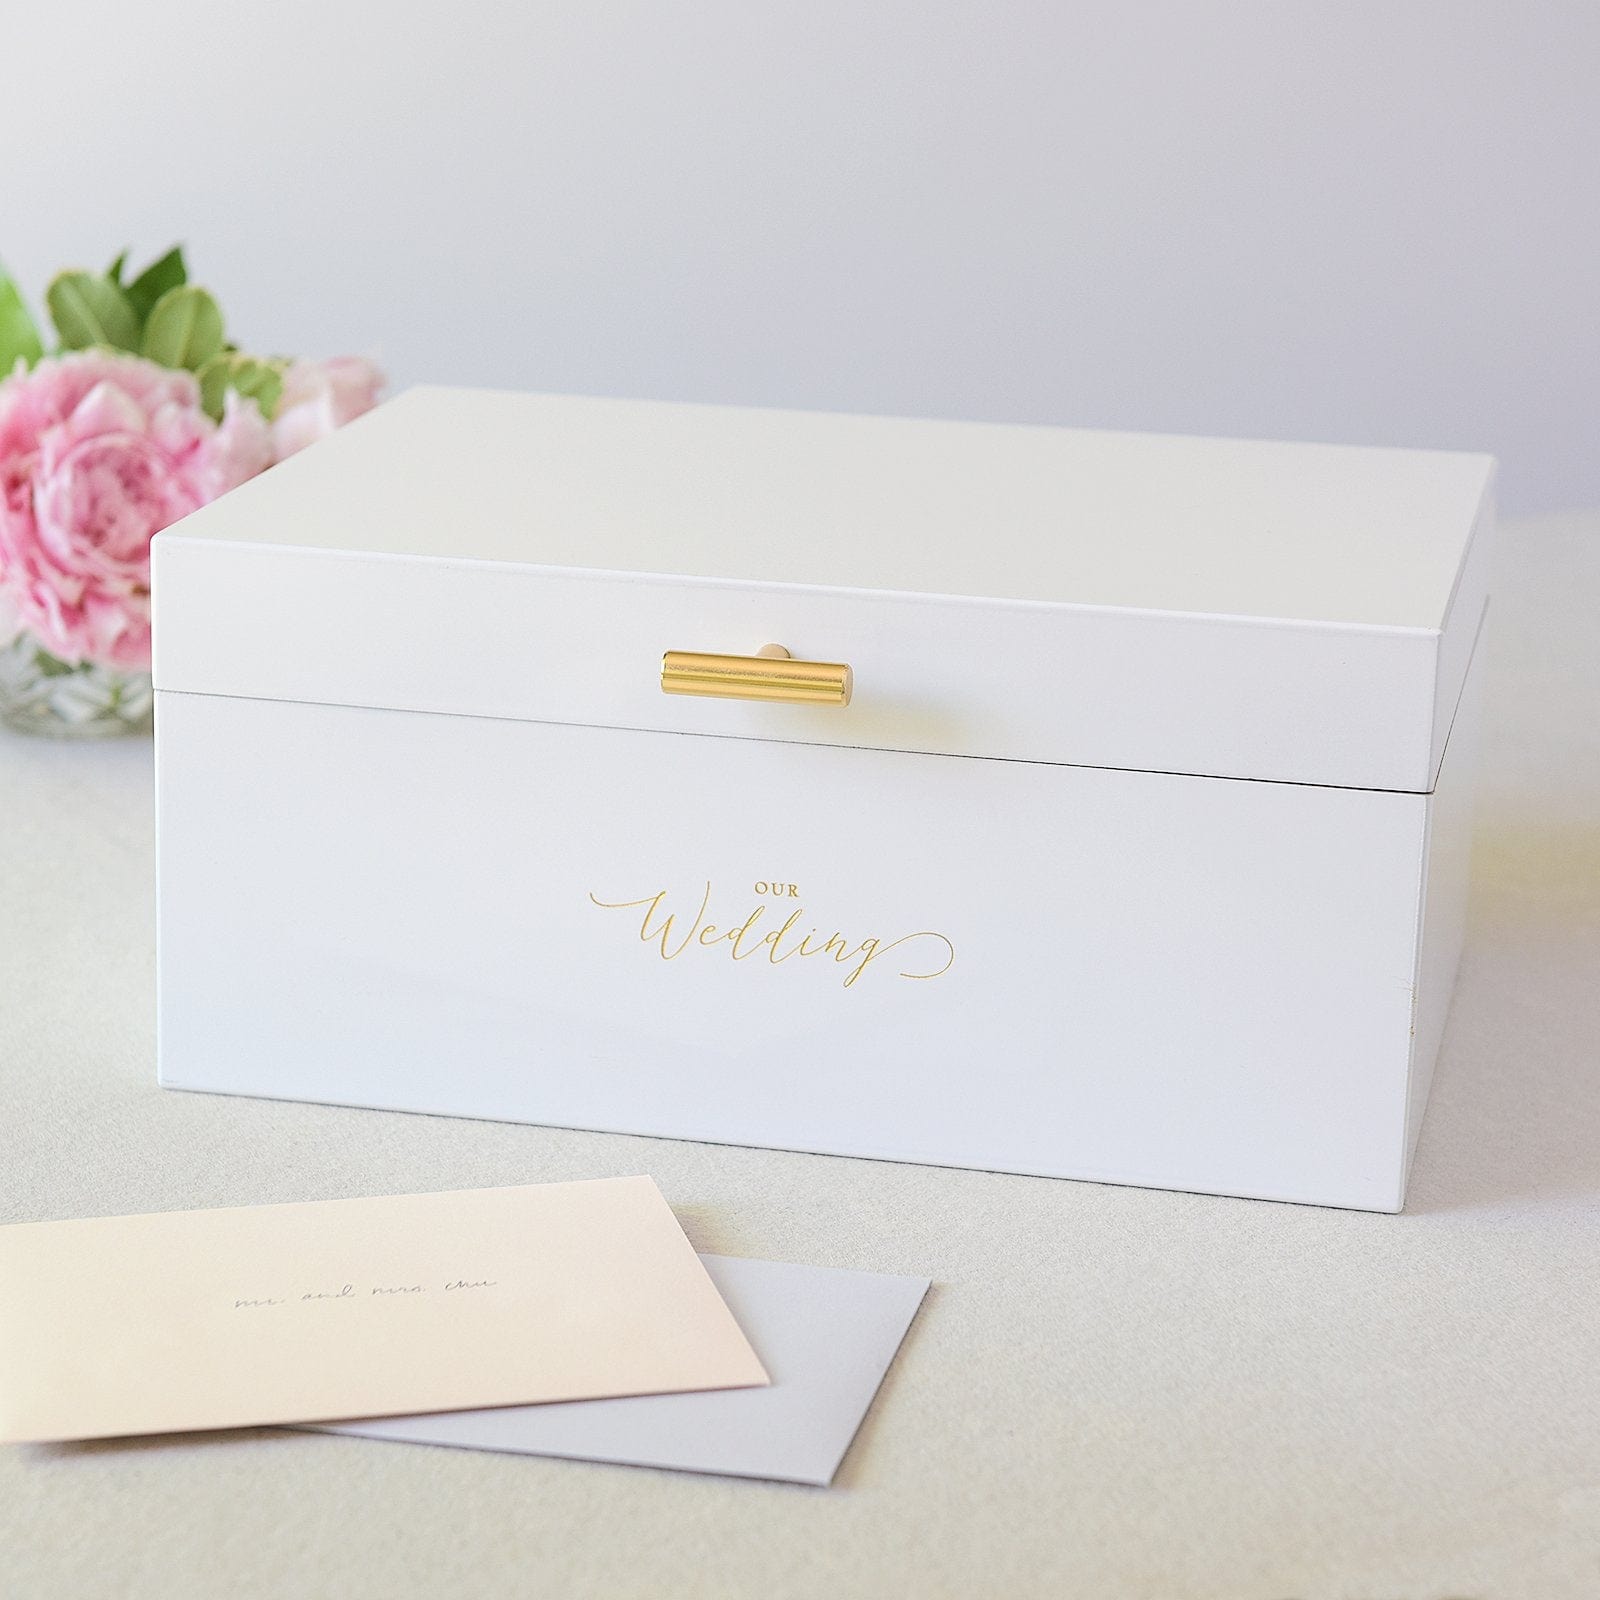 Envelope Addressing Etiquette for Weddings and Formal Occasions | Hallmark  Ideas & Inspiration